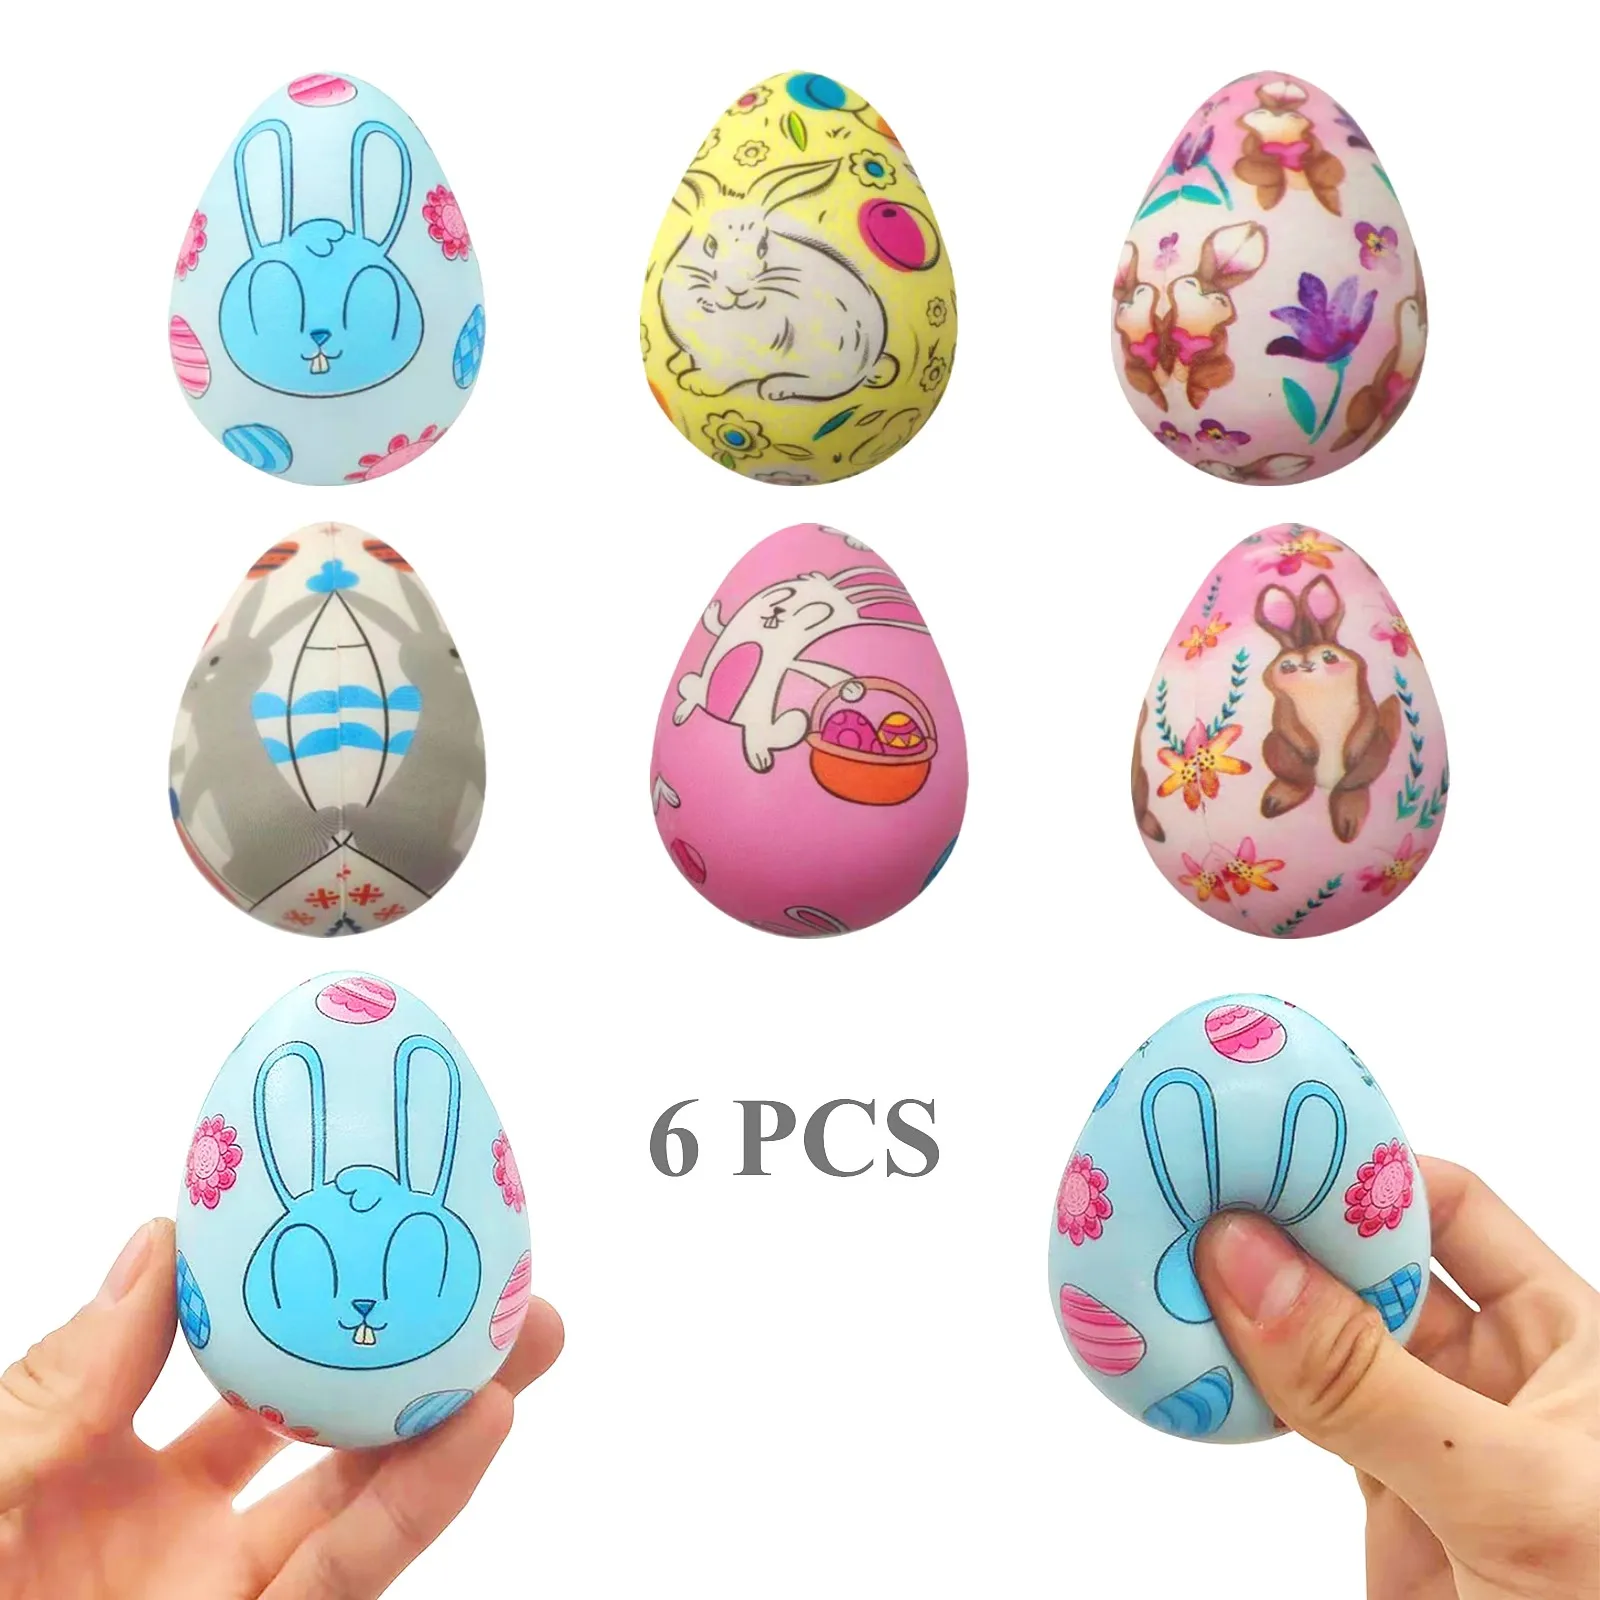 

6/18PCS Easter egg Set Decompression Toy Adults Decompression Fidget Spinner Slow Rebound Squishy Antistress for Hands Toys